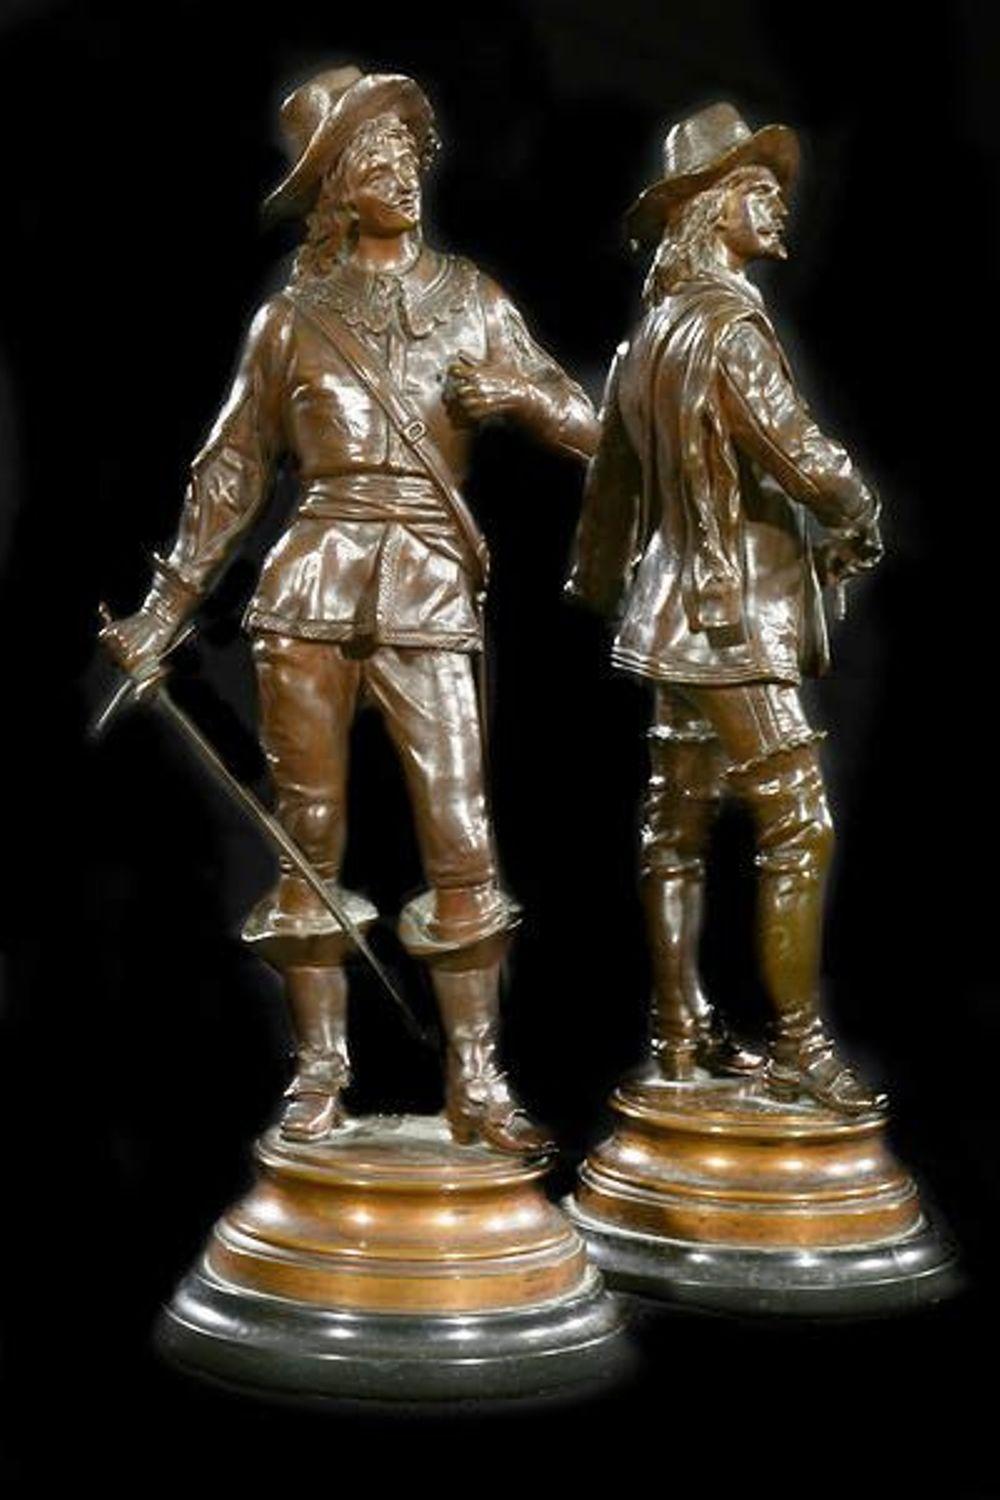 A pair of French 19th century bronze cavaliers signed C Anfrie, the signature for Charles Anfrie who was born in 1833 and died in 1905.

Charles Anfrie exhibited at The Salon between 1883 to 1895 and is known for his bronze figures of the military